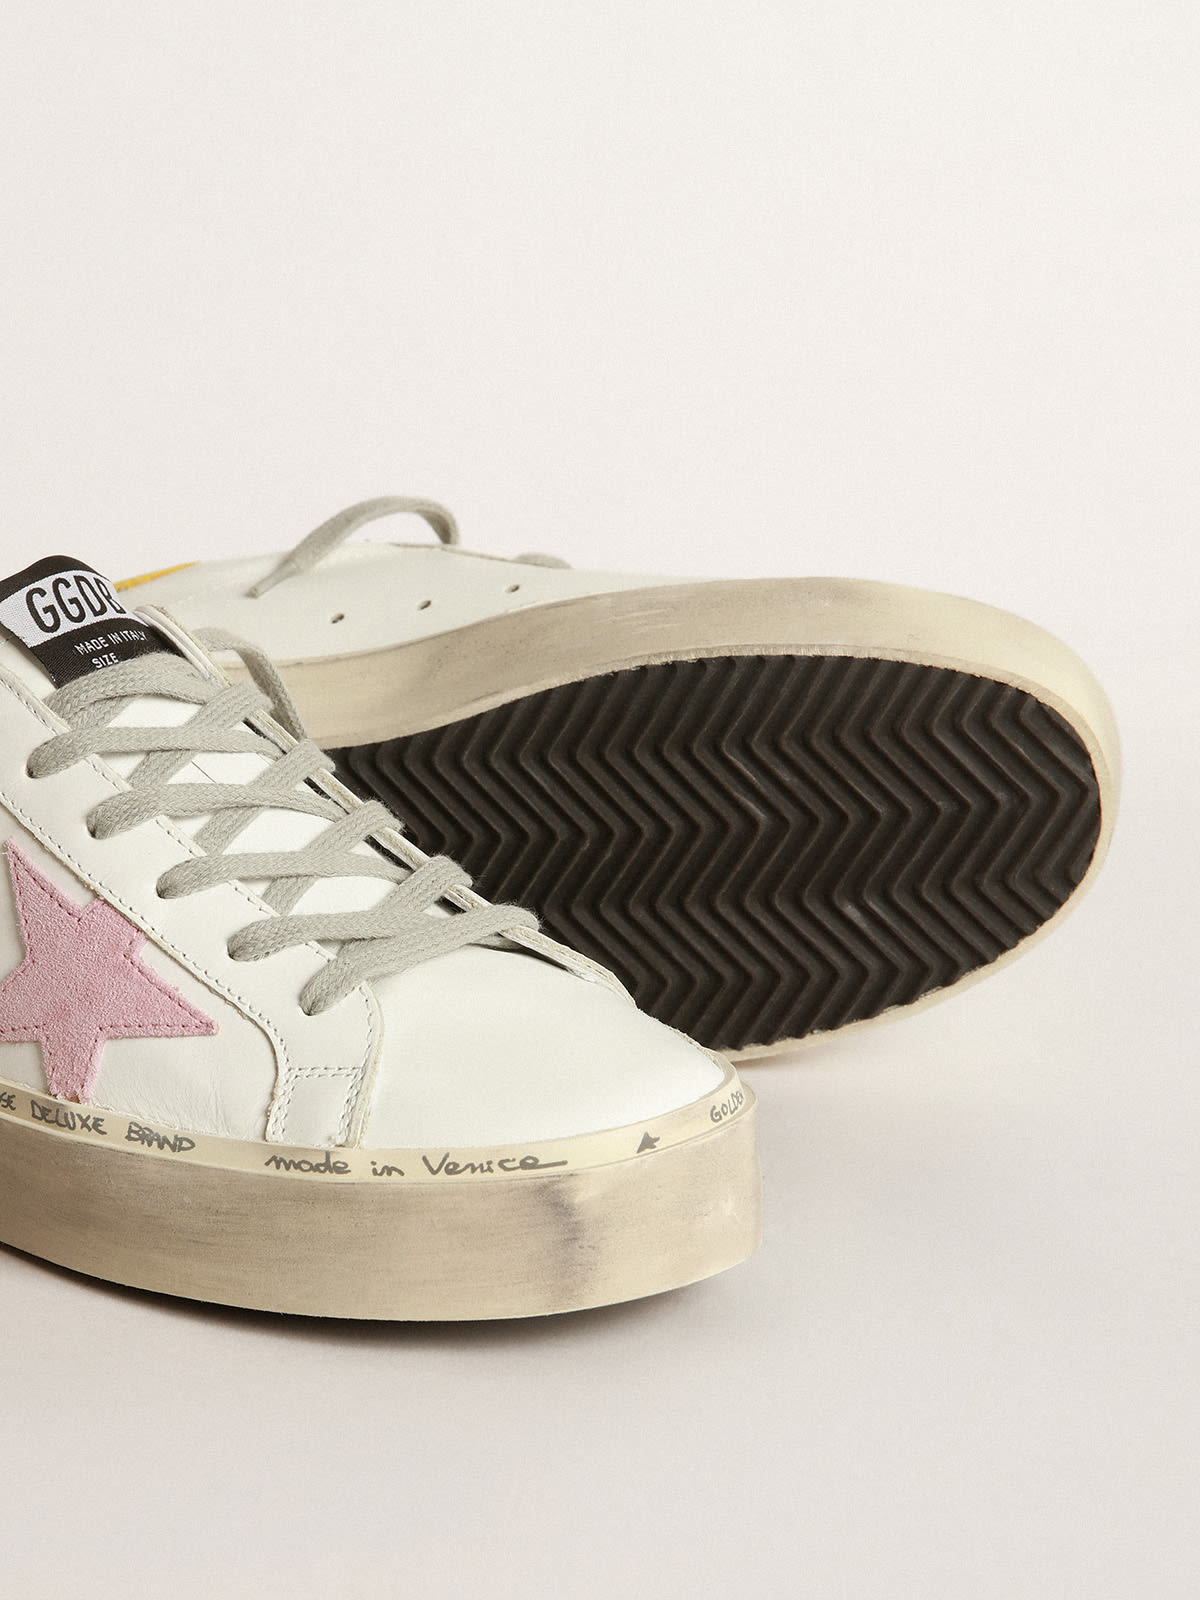 Golden Goose - Hi Star sneakers with pink suede star and yellow leather heel tab in 